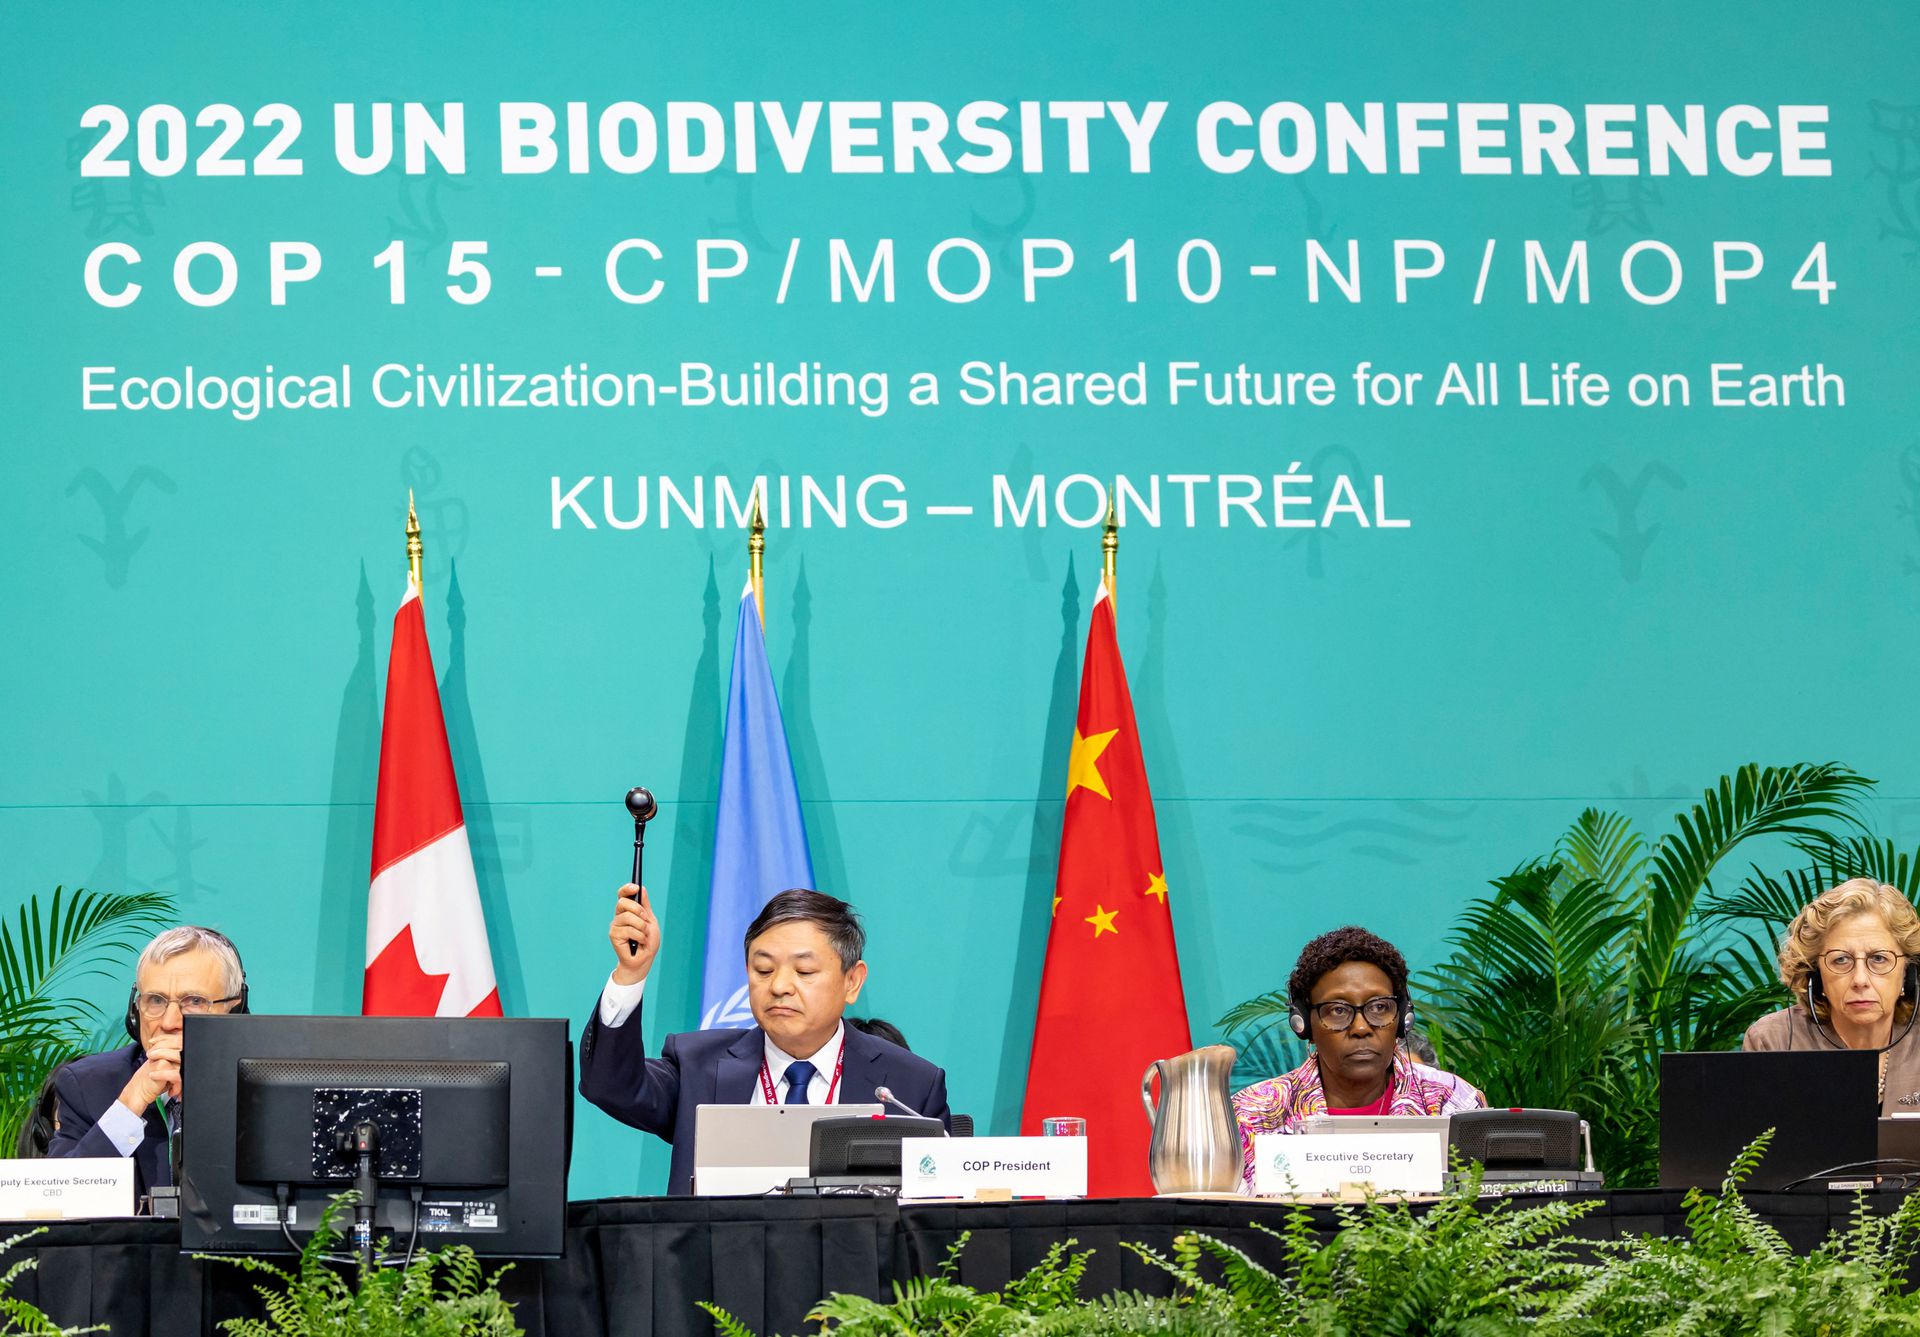 The president of the U.N.-backed COP15 biodiversity conference, China’s Minister of Ecology and Environment Huang Runqiu, lowers the gavel to pass the The Kunming-Montreal Global Biodiversity Framework in Montreal, Quebec, Canada, 19 December 2022. Mr. Runqiu gaveled the conference to a close over the objections from the delegation of the Democratic Republic of Congo. A representative from Cameroon said that the agreement was passed by force of hand. A Ugandan representative requested to be on-record that Uganda did not support the procedure. Photo: Julian Haber / UN Biodiversity / REUTERS